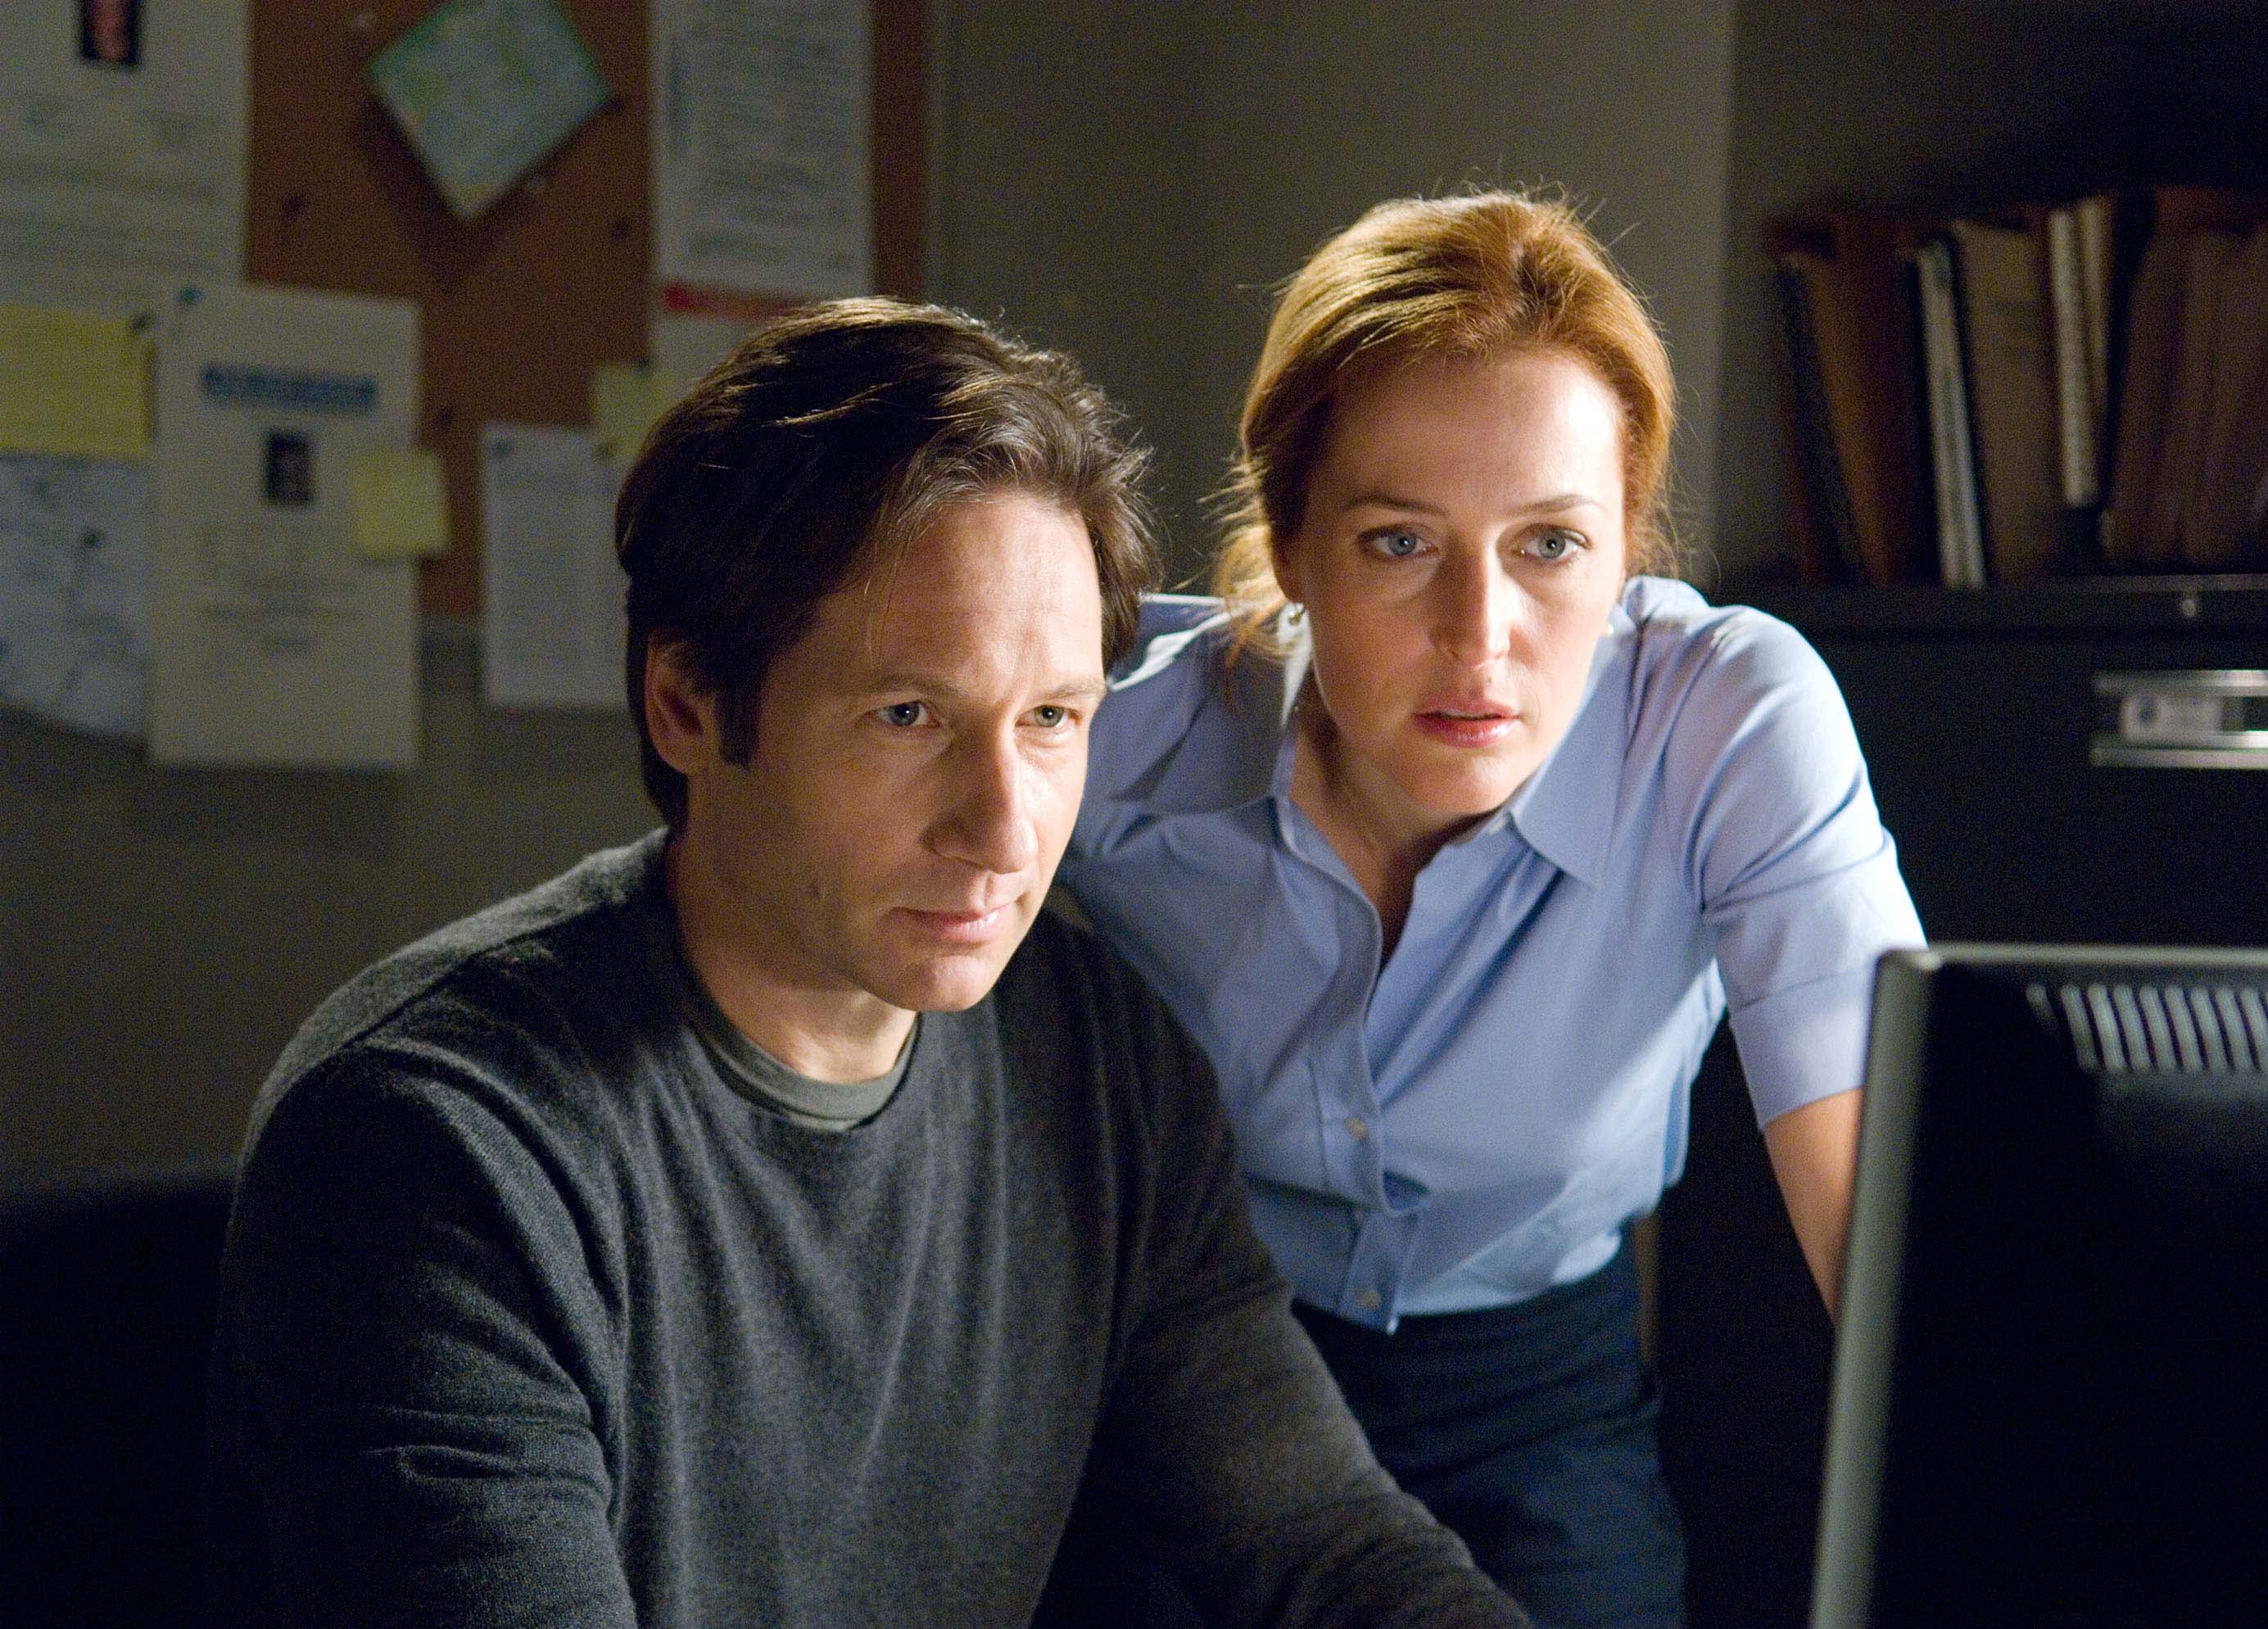 David Duchovny (L) and Gillian Anderson (R) are shown in a scene from, "The X-Files: I Want to Believe."